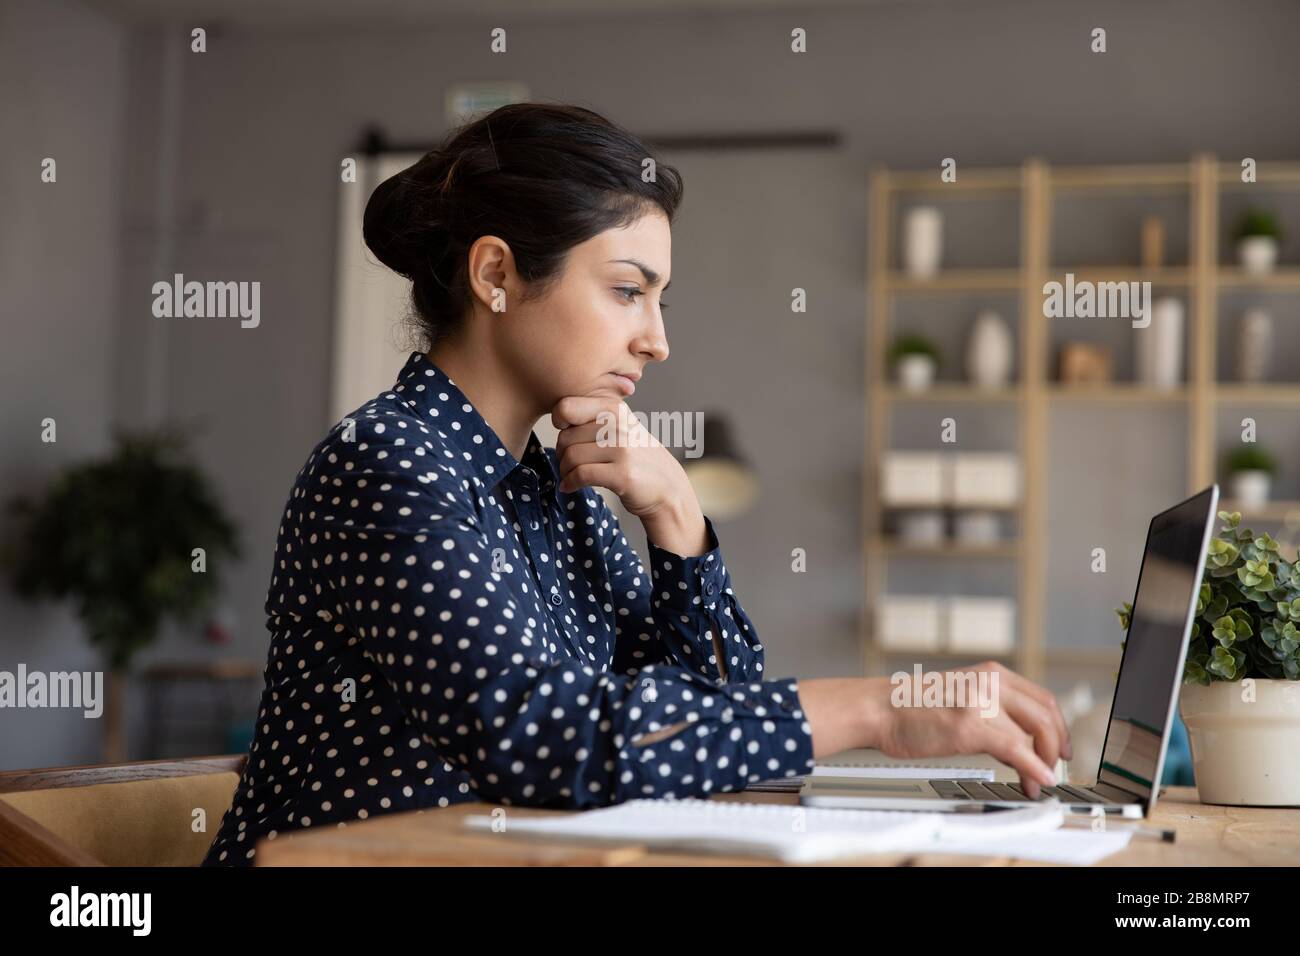 Thoughtful Indian woman looking at laptop screen, pondering task Stock Photo